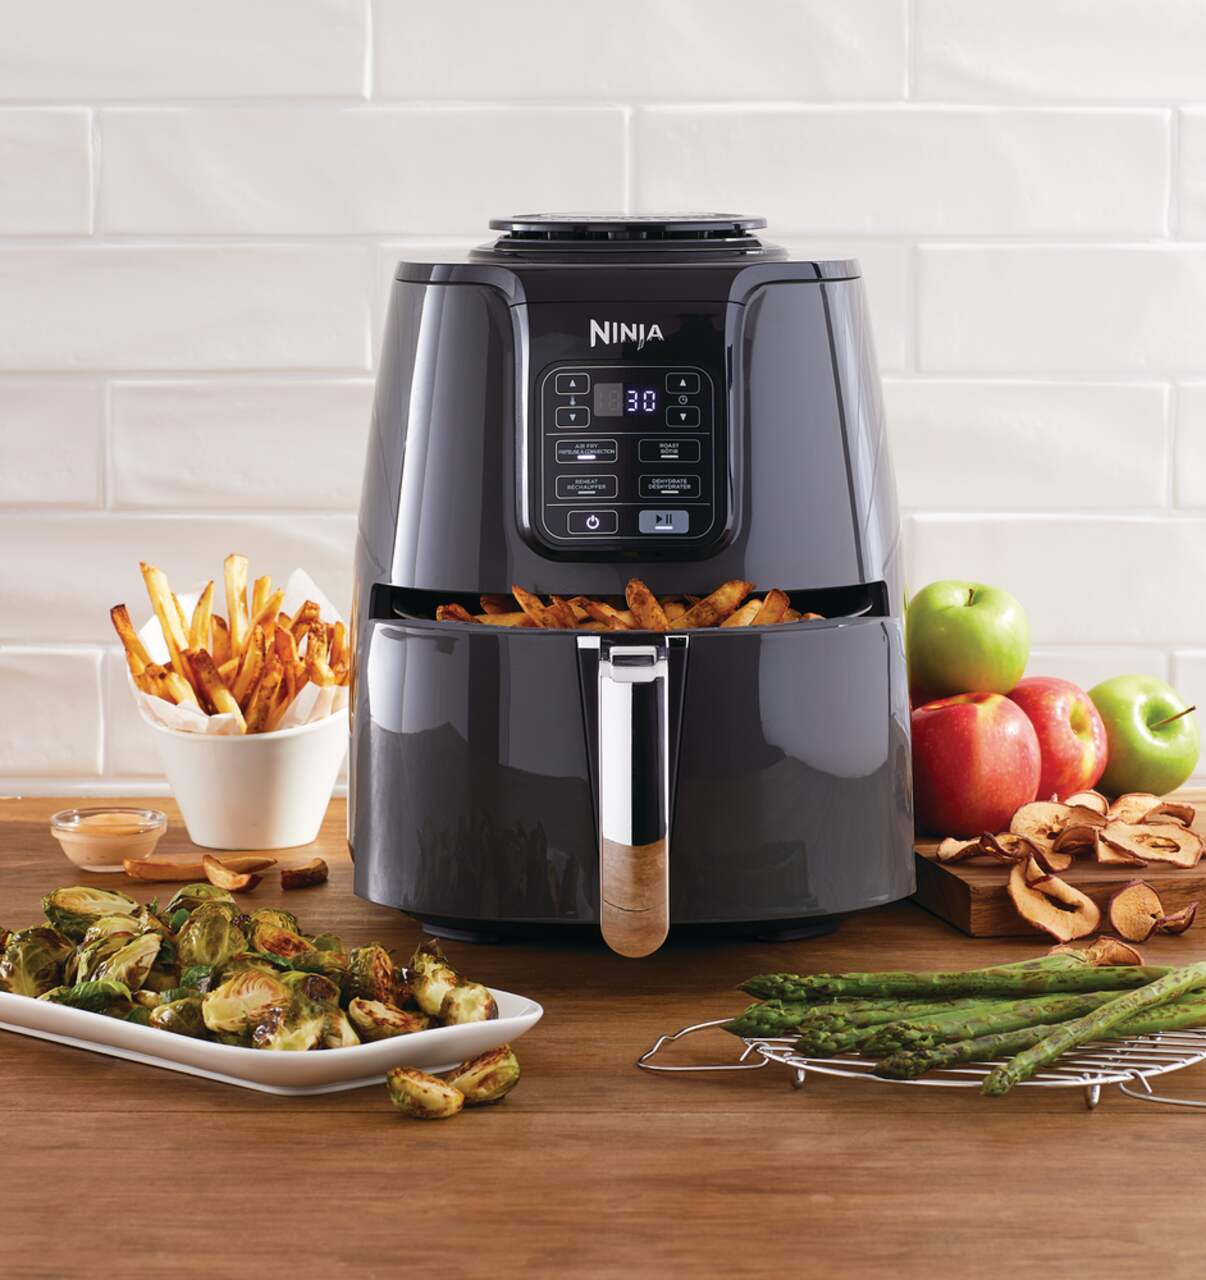 https://media-www.canadiantire.ca/product/living/kitchen/kitchen-appliances/0439582/ninja-cyclonic-air-fryer-05ec81af-96af-445e-97f8-8b4cb4152754.png?imdensity=1&imwidth=1244&impolicy=mZoom